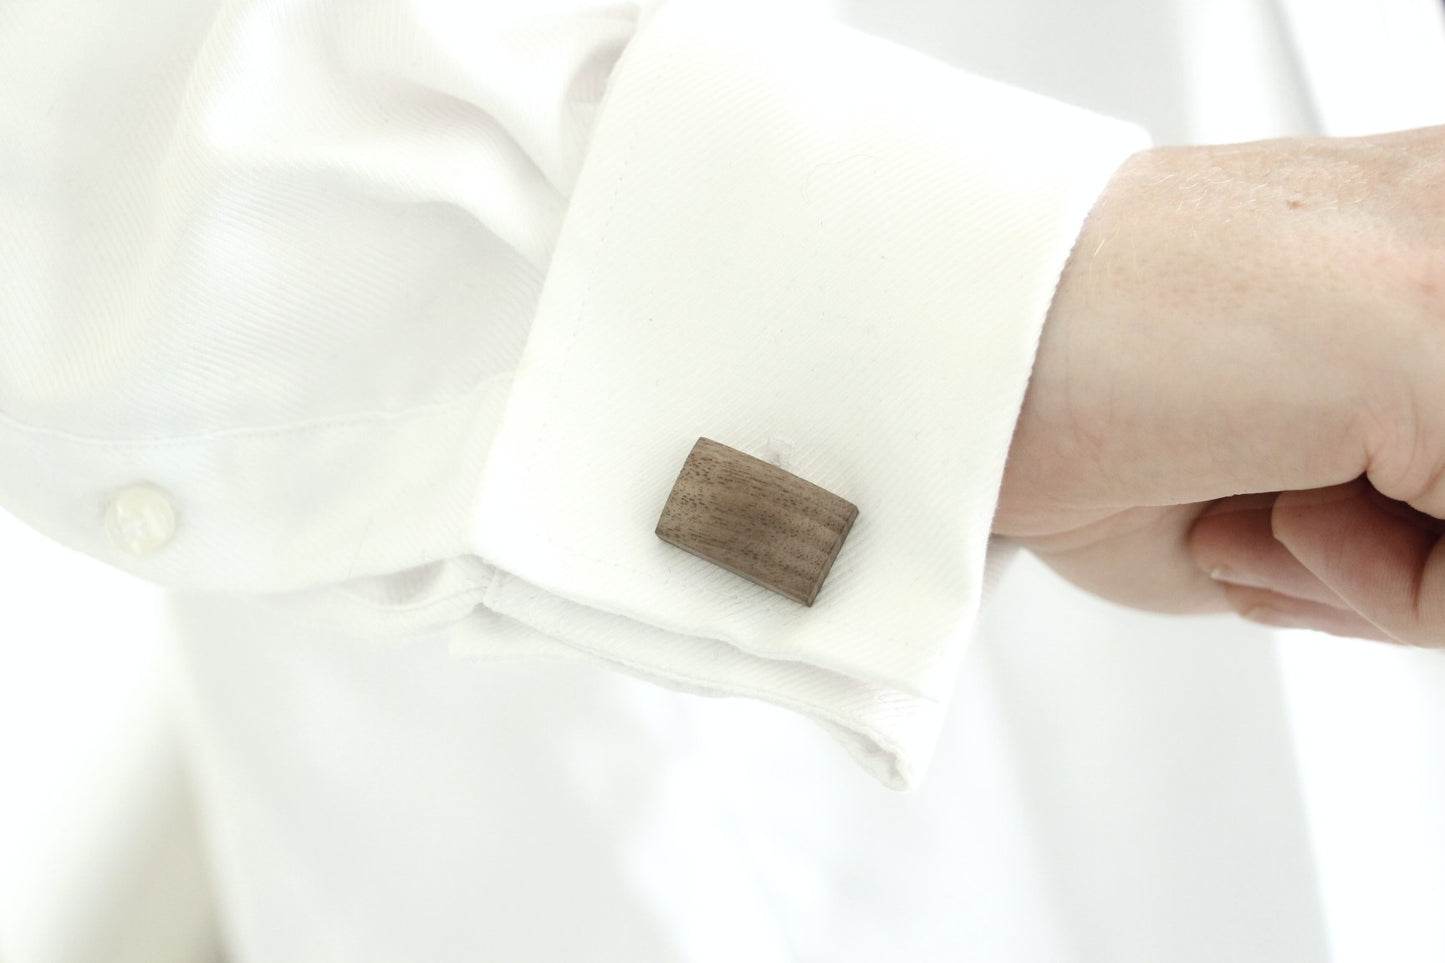 2x Personalised Initials & Date Rectangle Cufflinks